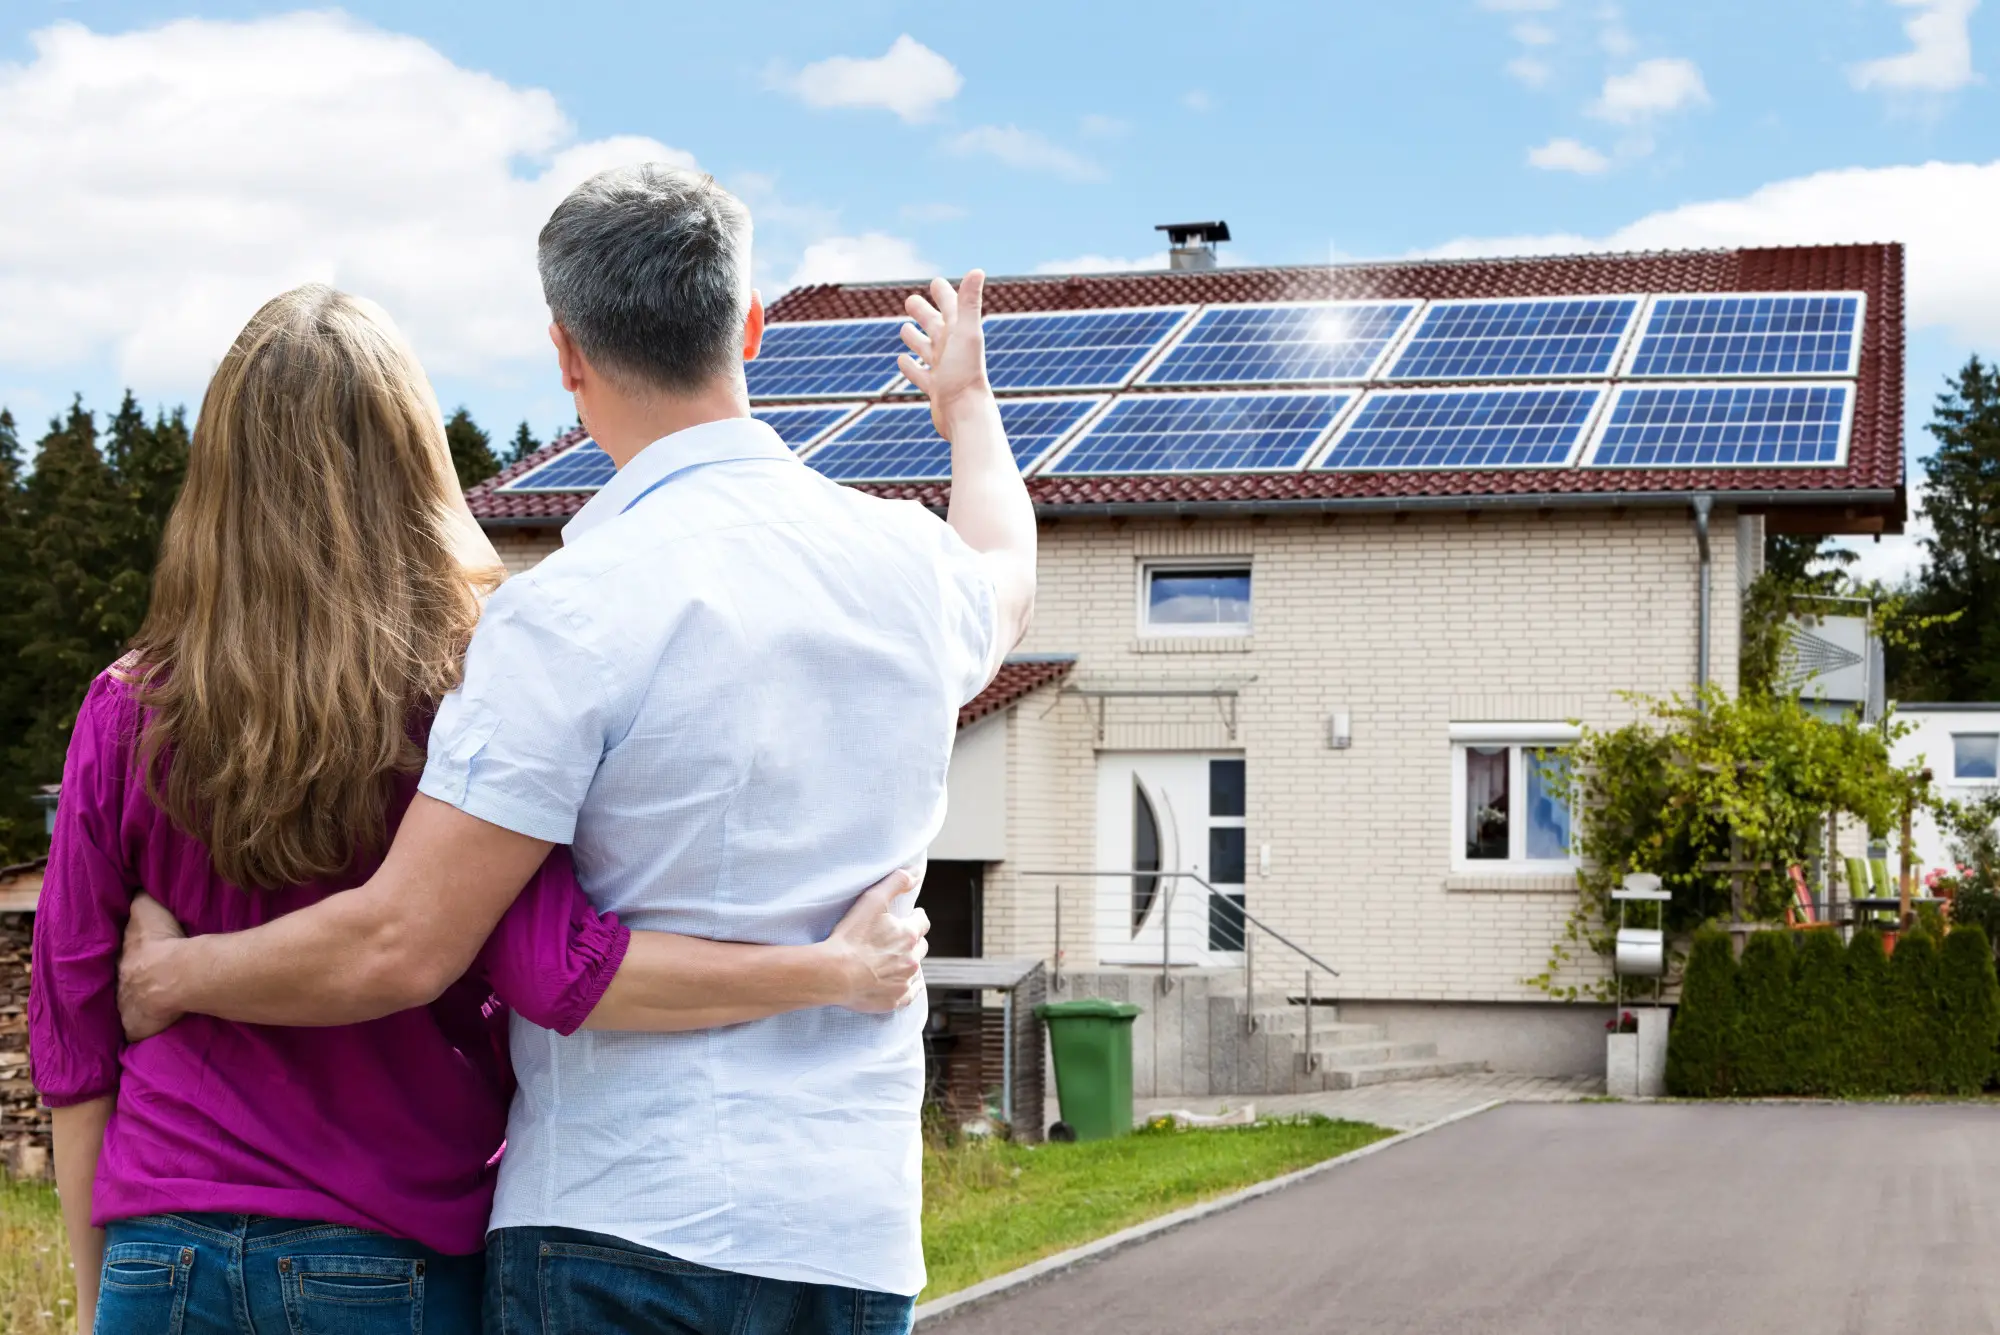 6 Essential Marketing Strategies for Solar Panel Installers